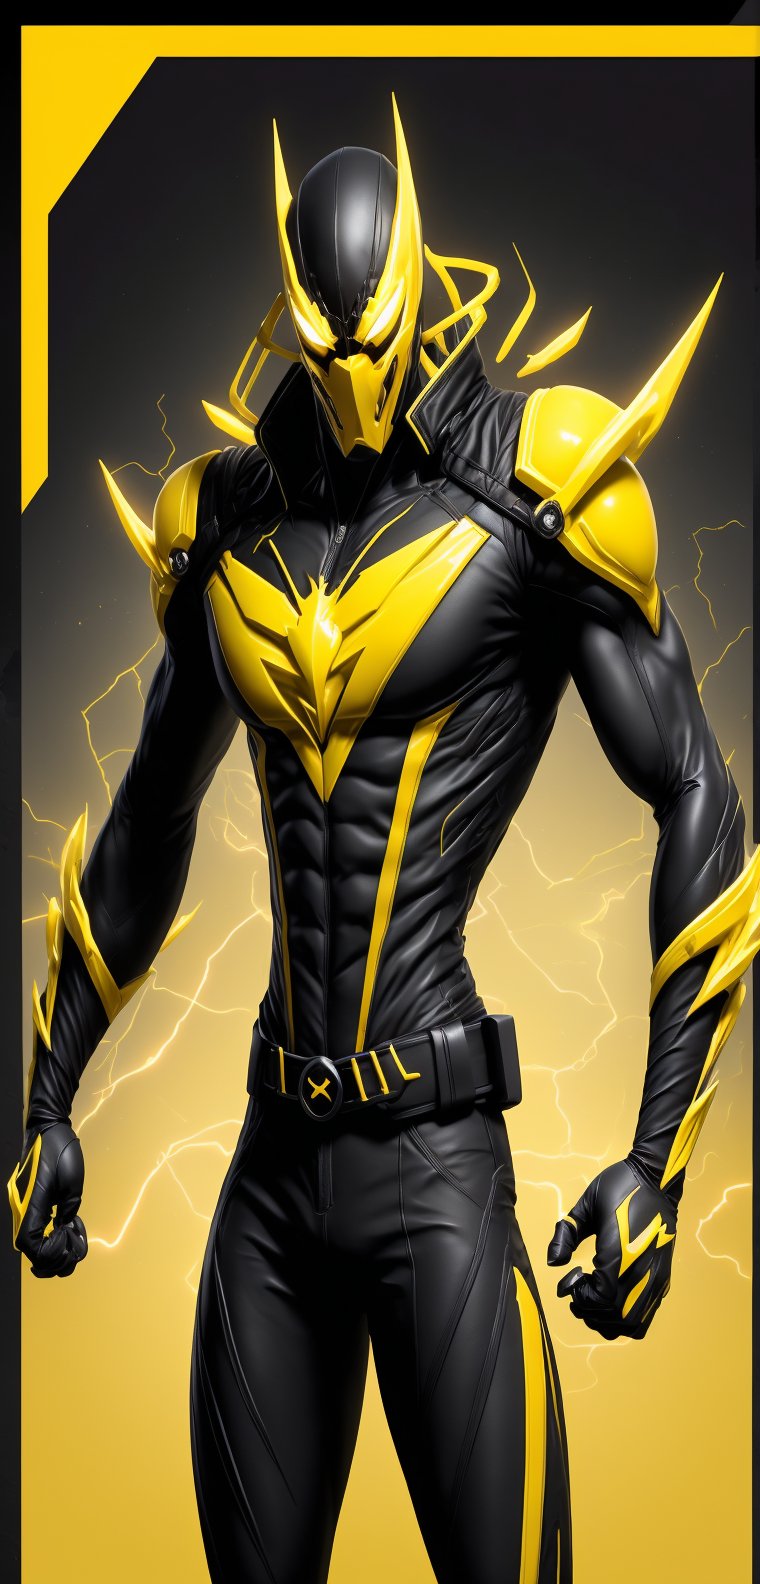 A speedster hero, with an imposing presence and athletic figure, stands in a ready-to-run stance. His suit is a vibrant mix of yellow and black, designed not only for speed but also protection and style. This hero, known as "Black Lightning", embodies the essence of speed and justice.
Mask: A tight-fitting mask covers your face, exposing only your eyes, nose, and mouth. The mask is black with yellow details around the eyes, forming a streamlined design that accentuates his penetrating and determined gaze.

Emblem: In the center of his chest, a stylized yellow lightning bolt emblem stands out against the black background of the suit. This emblem is the symbol of his heroic identity and his ability to move at superhuman speeds.

Upper: The upper part of the suit is primarily yellow with black details on the shoulders, arms and sides, providing a dynamic contrast that reflects his energy and speed. The suit's material is light but strong, designed to withstand the friction and heat generated by its rapid mobility.

Gloves: His gloves are black with yellow details on the fingers and wrists, providing a firm grip and protecting his hands during his missions.

Belt: A black belt cinched around your waist, with small compartments to hold useful devices and communication tools.

Bottom: The pants of the suit are black with yellow details on the sides, continuing the streamlined design and ensuring flexibility and comfort. The boots, also black with yellow lightning bolts, are designed for maximum traction and durability, with reinforced soles to absorb the impact of your fast runs.